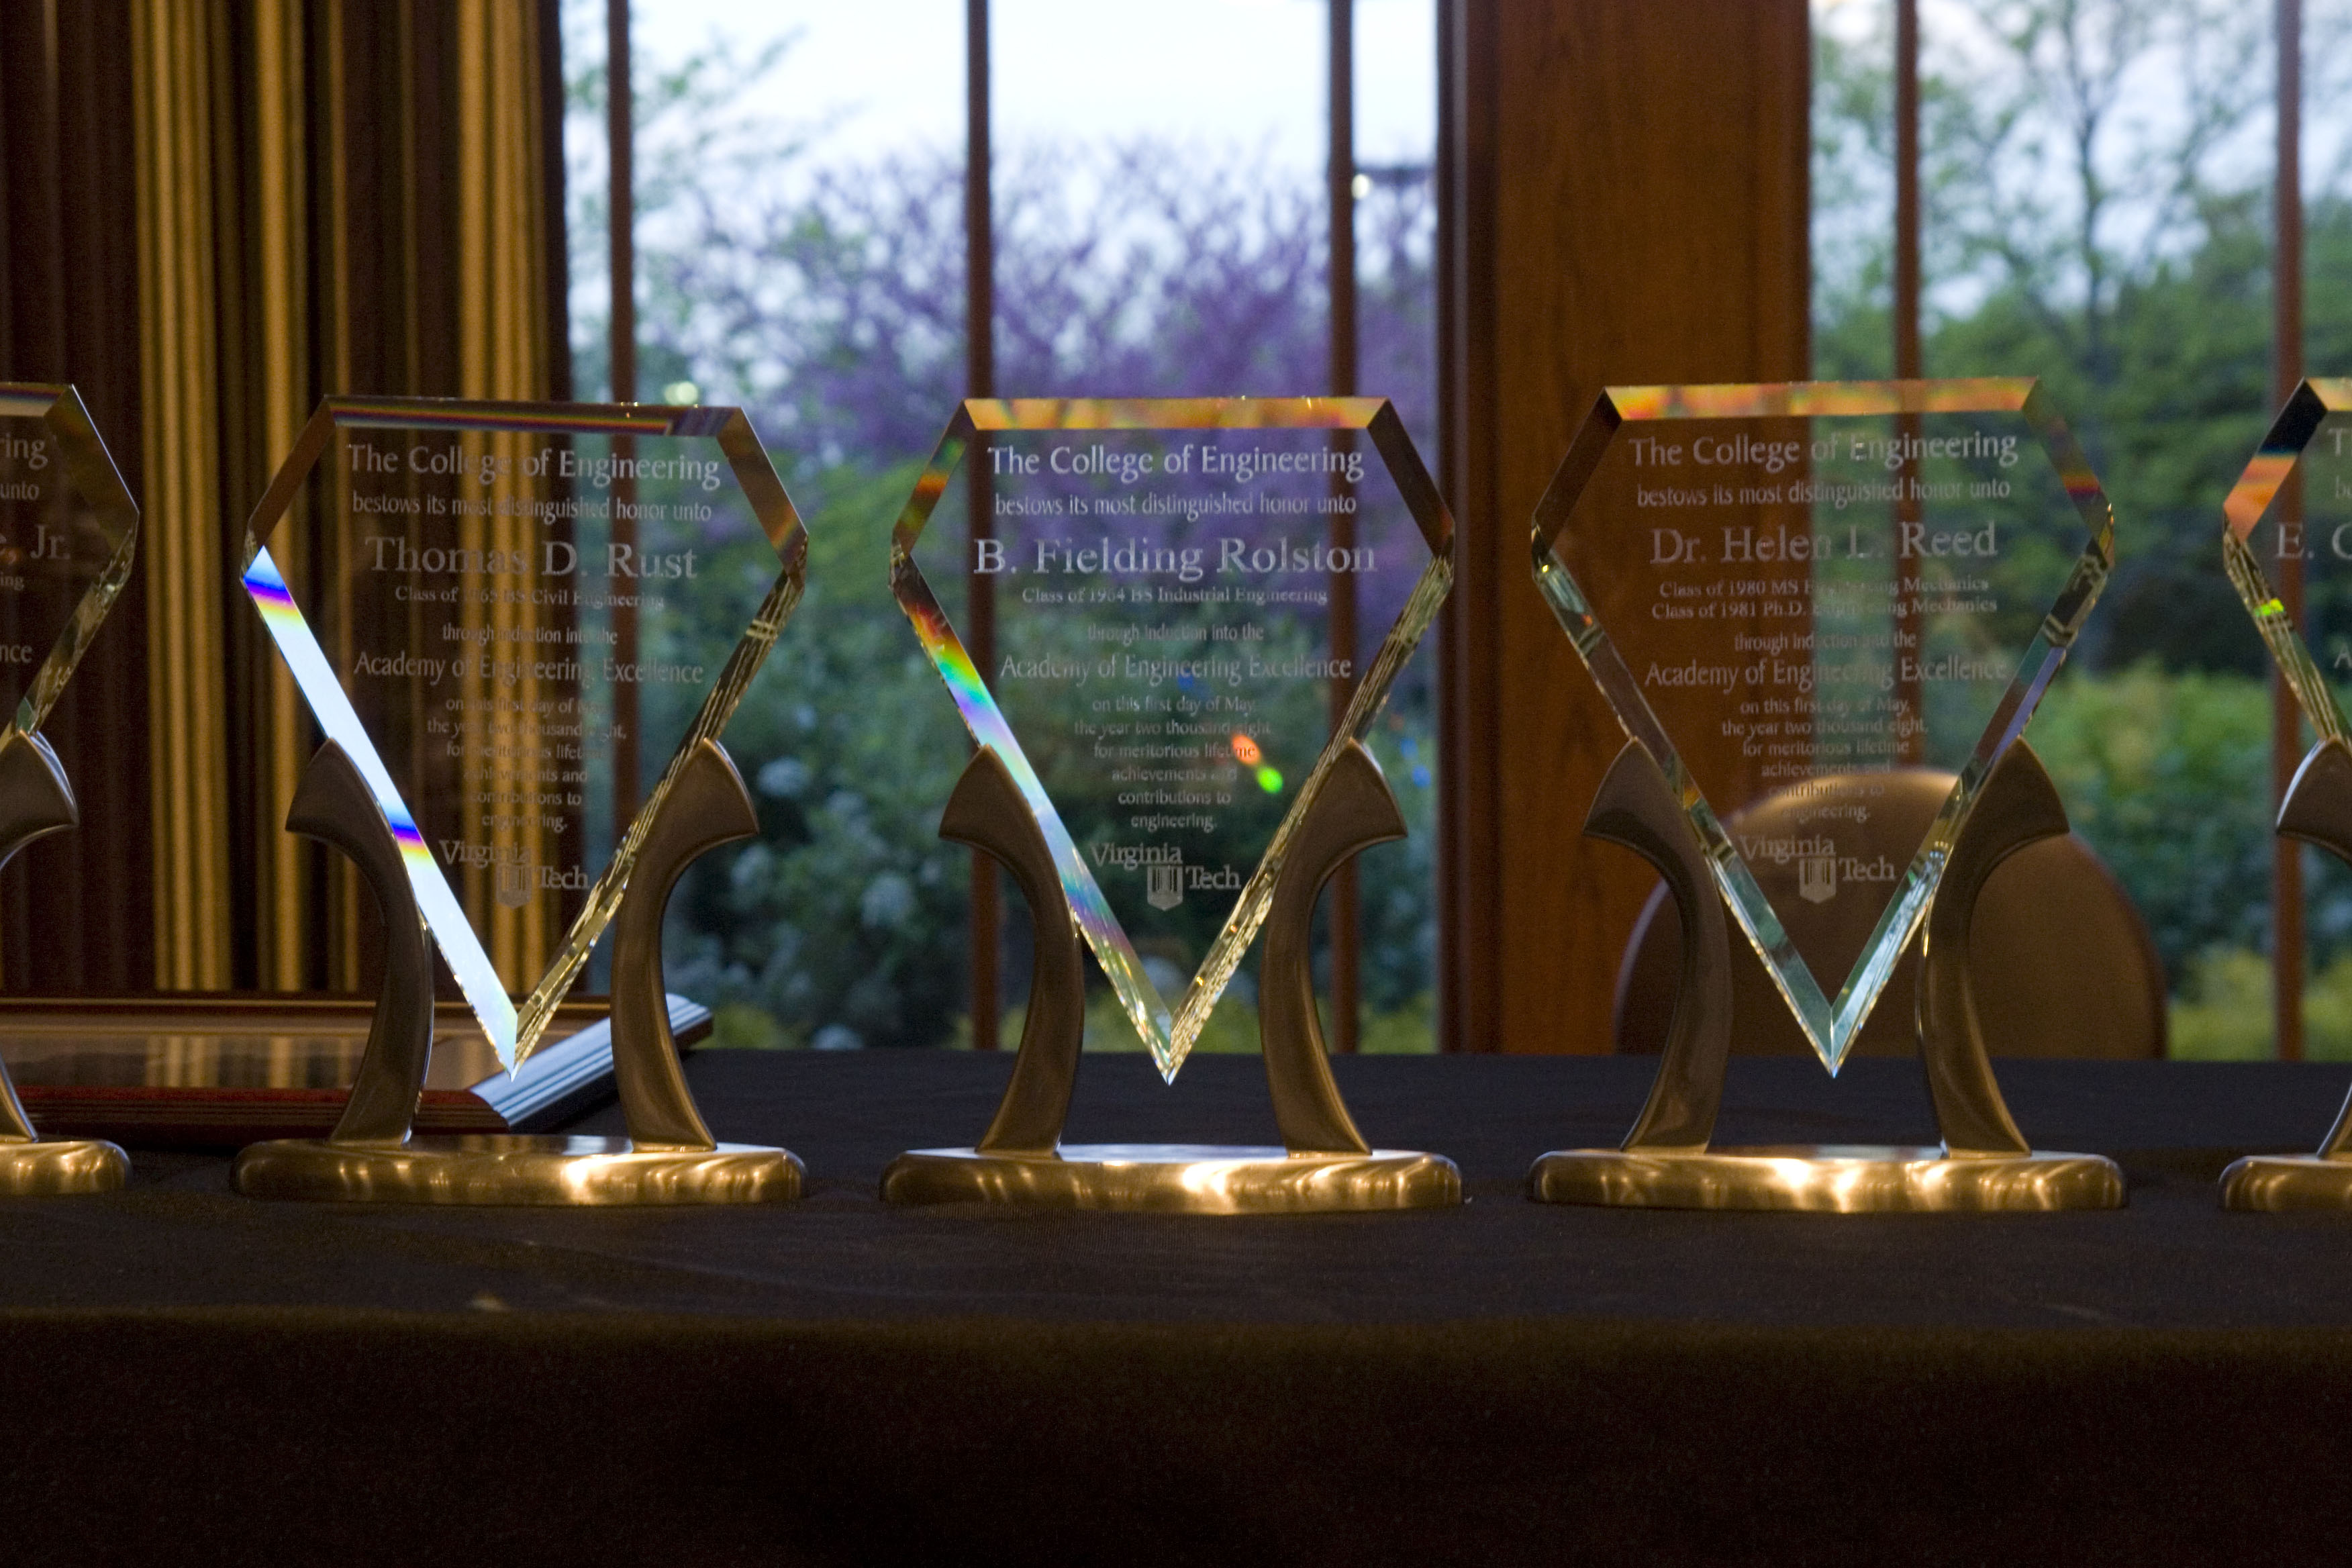 Each new member of the Virginia Tech Academy of Engineering Excellence is invited to an awards dinner. Family members and close friends are also invited to accompany each inductee, and a commemorative award is presented.